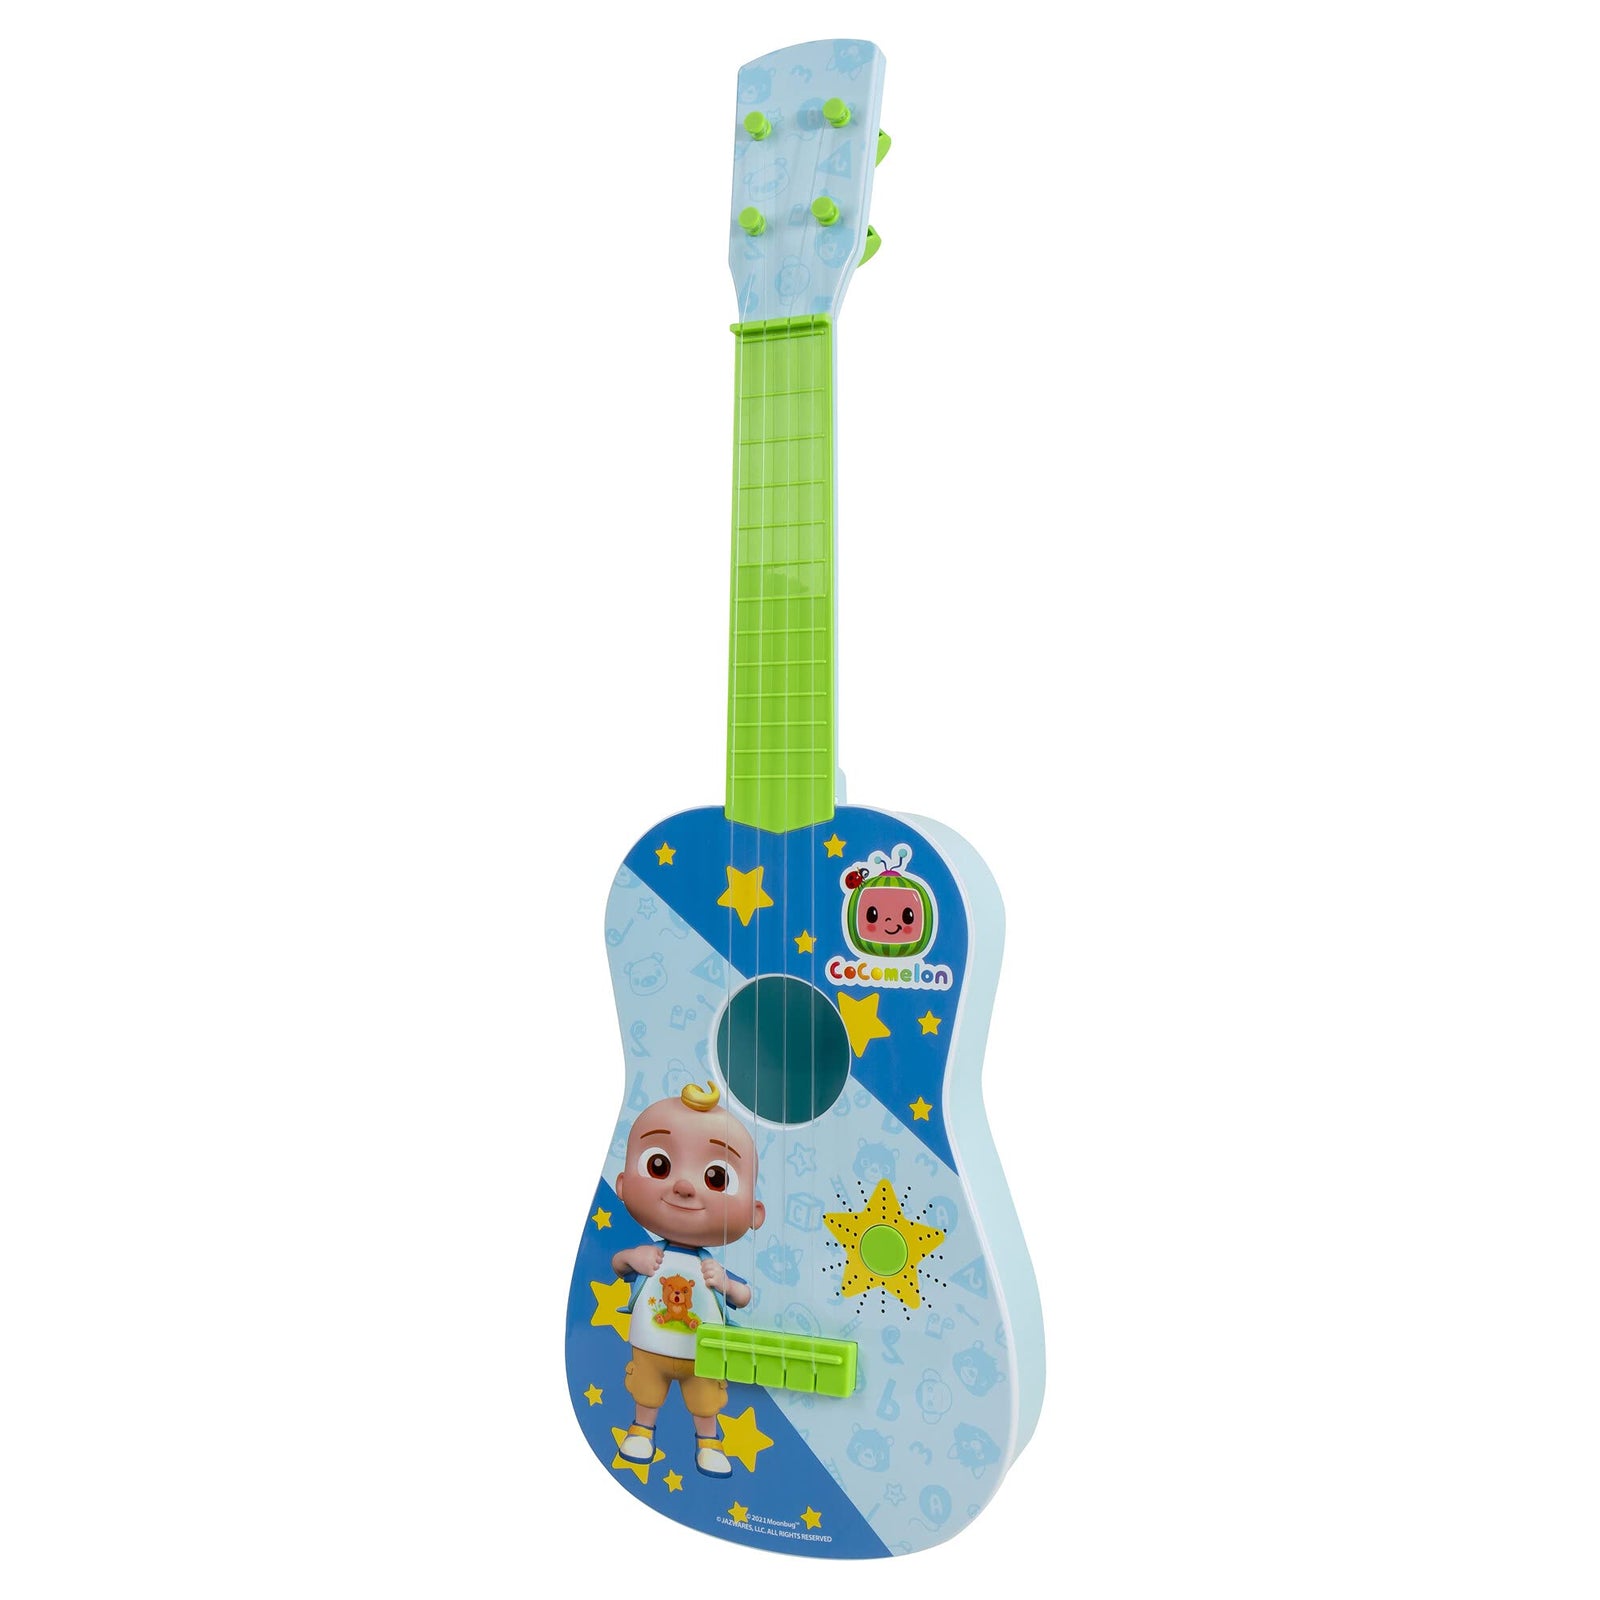 First Act CoComelon Musical Guitar, 23.5” Kids Guitar - Plays Clips of The ‘Finger Family’ Song - Musical Instruments for Kids, Toddlers, and Preschoolers